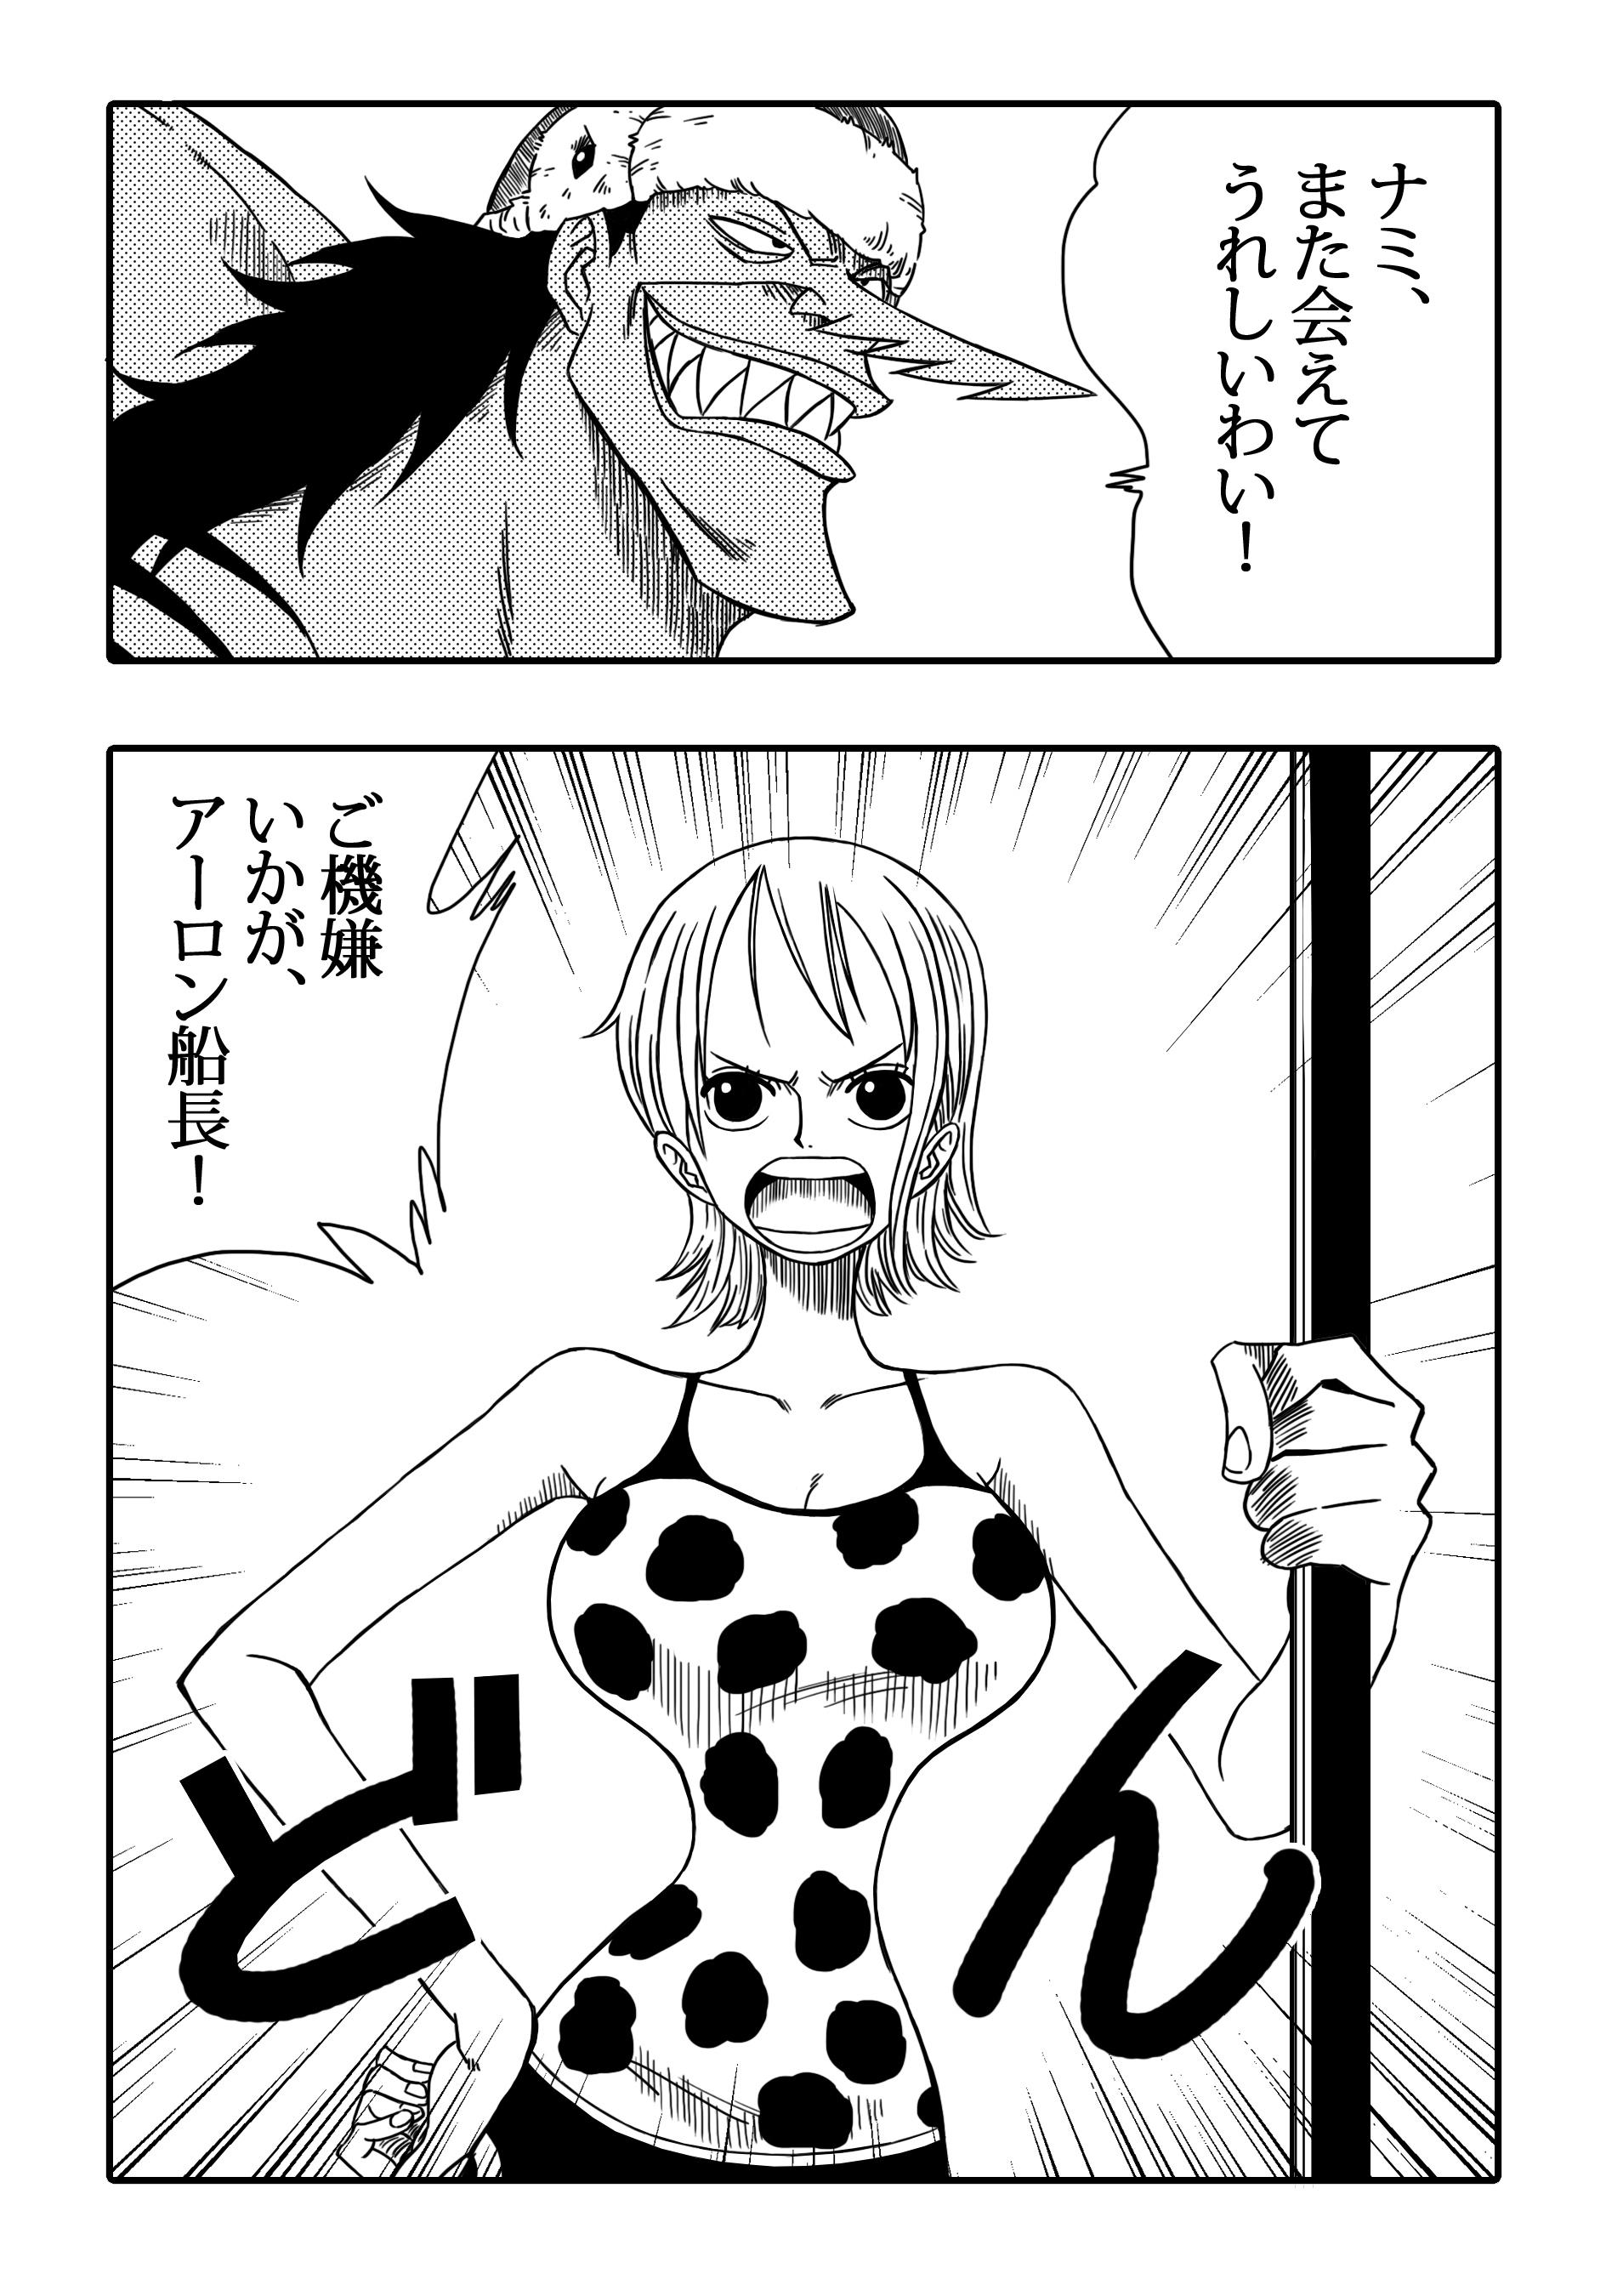 Swingers Two Piece - Nami vs Arlong - One piece Stockings - Page 3